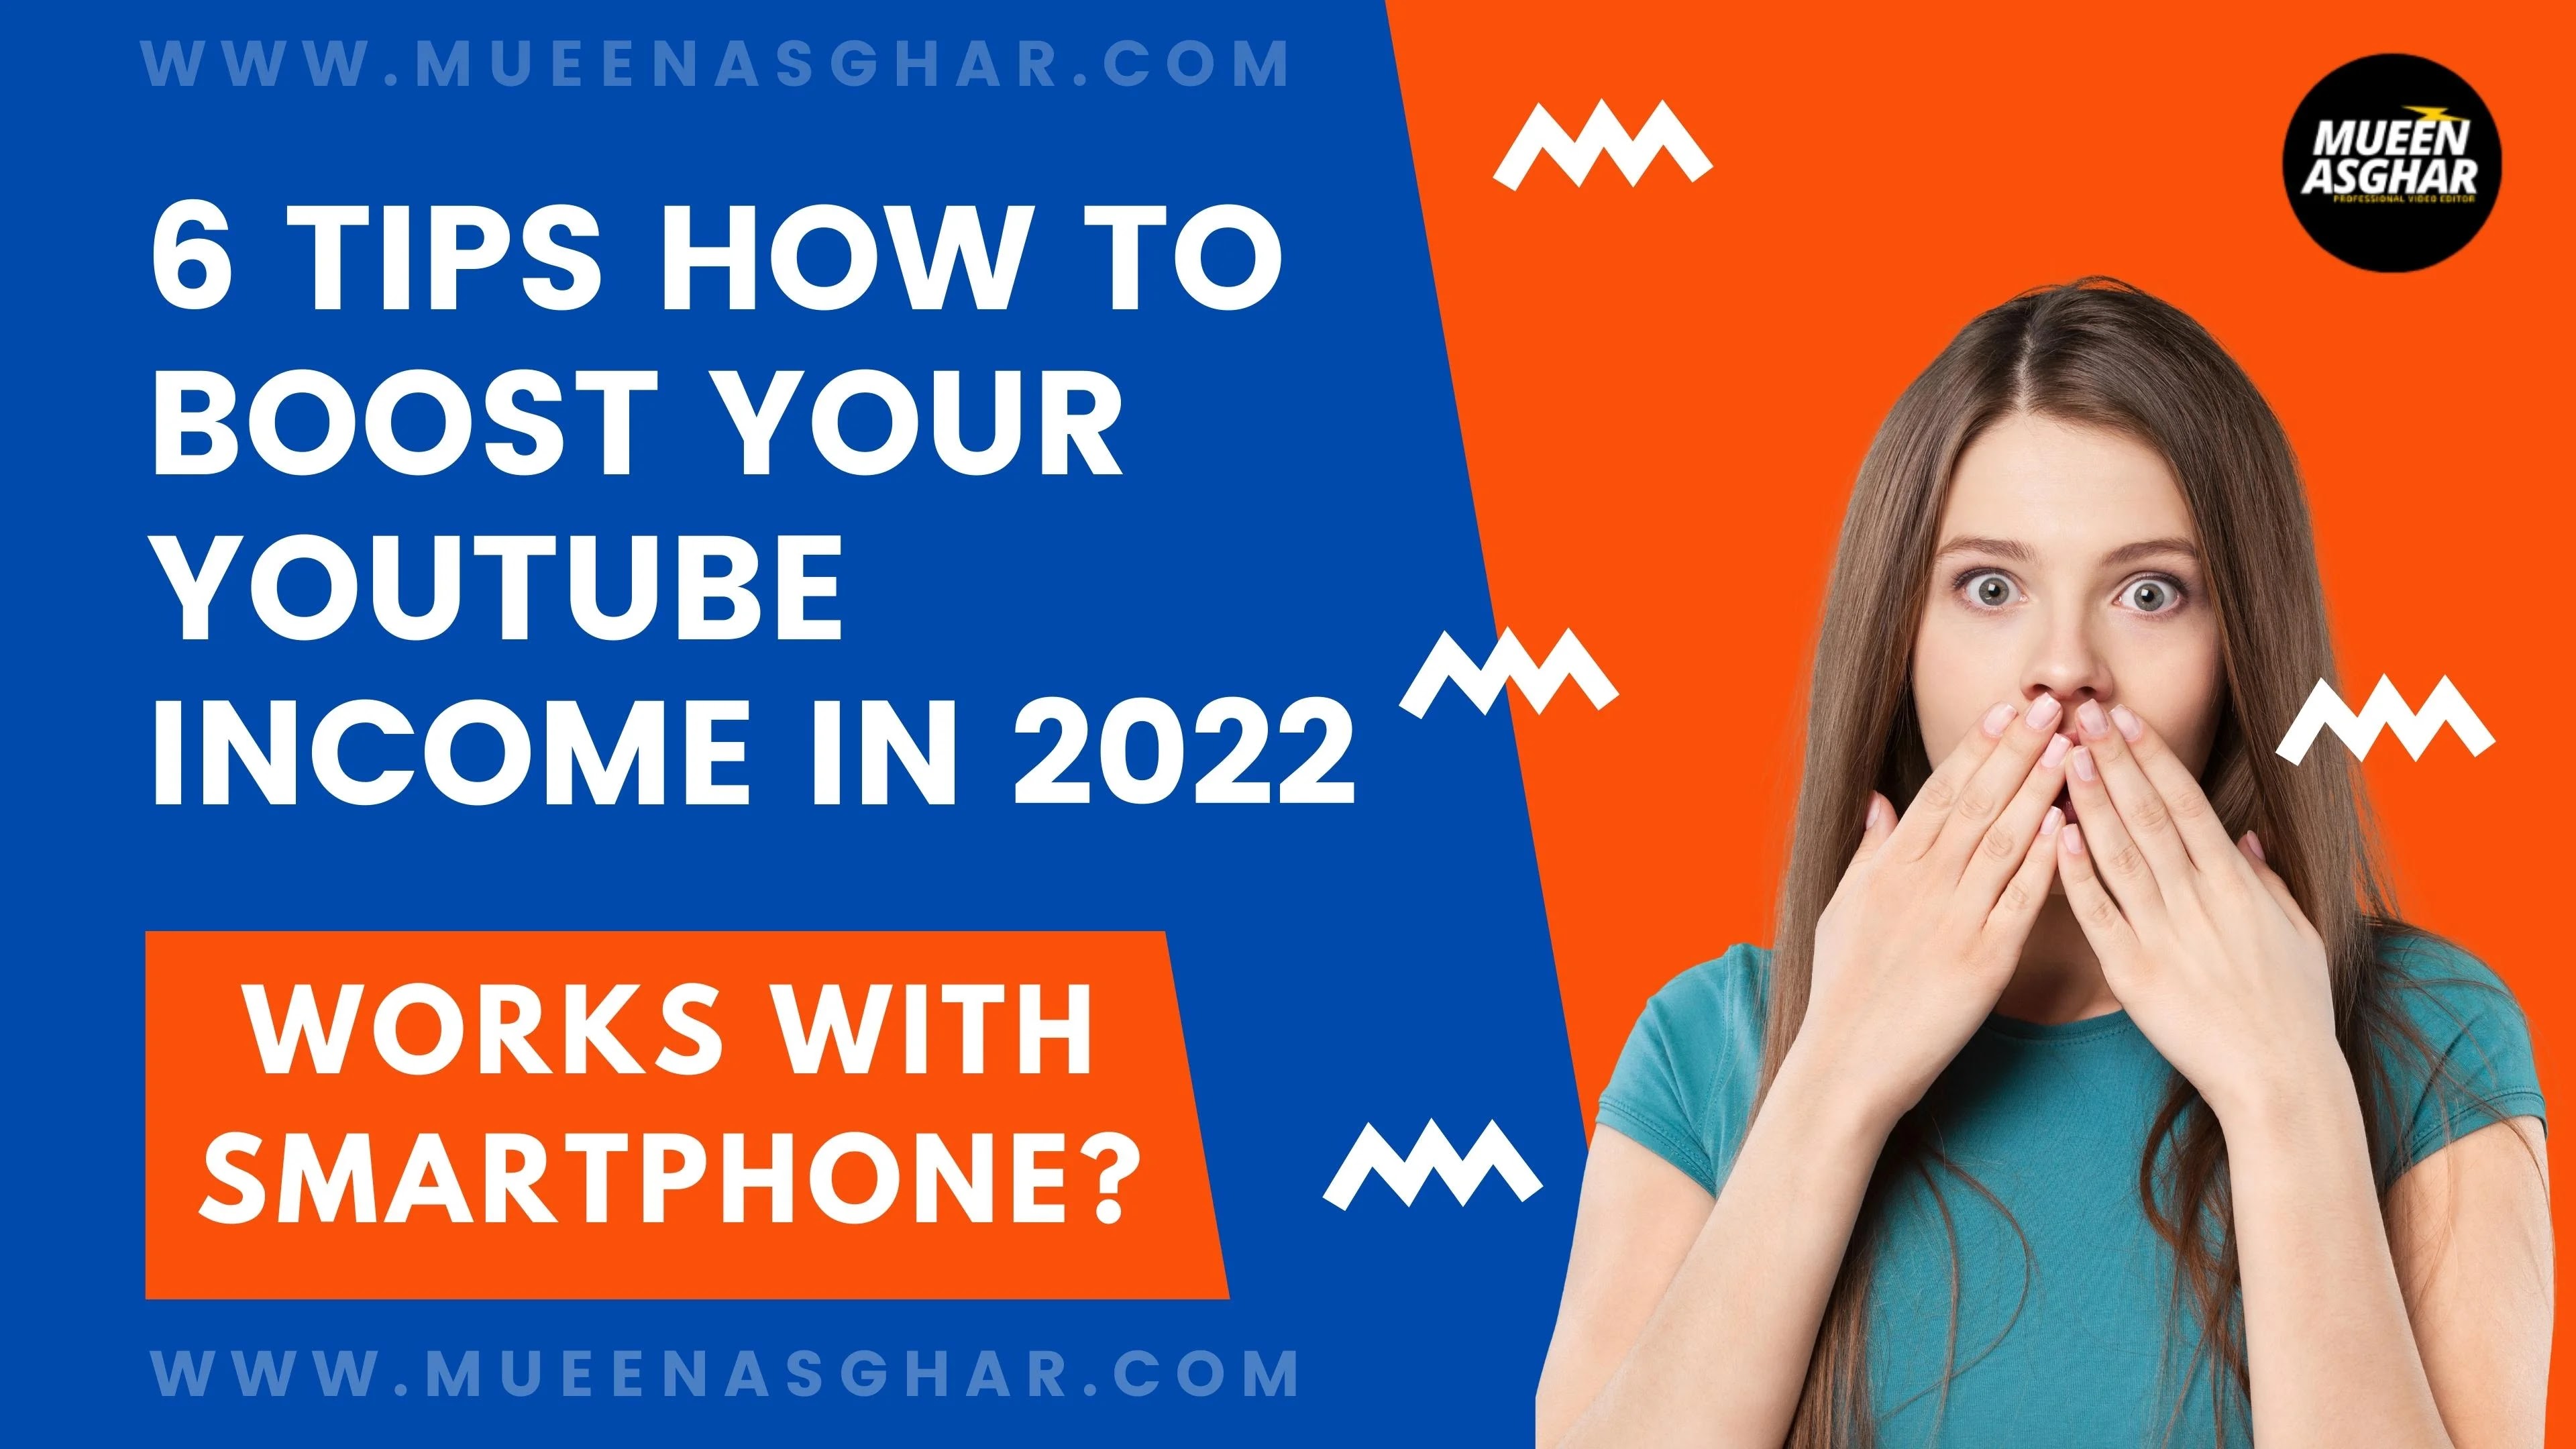 6 Tips How To Boost Your YouTube Income In 2022 - How to make money on YouTube